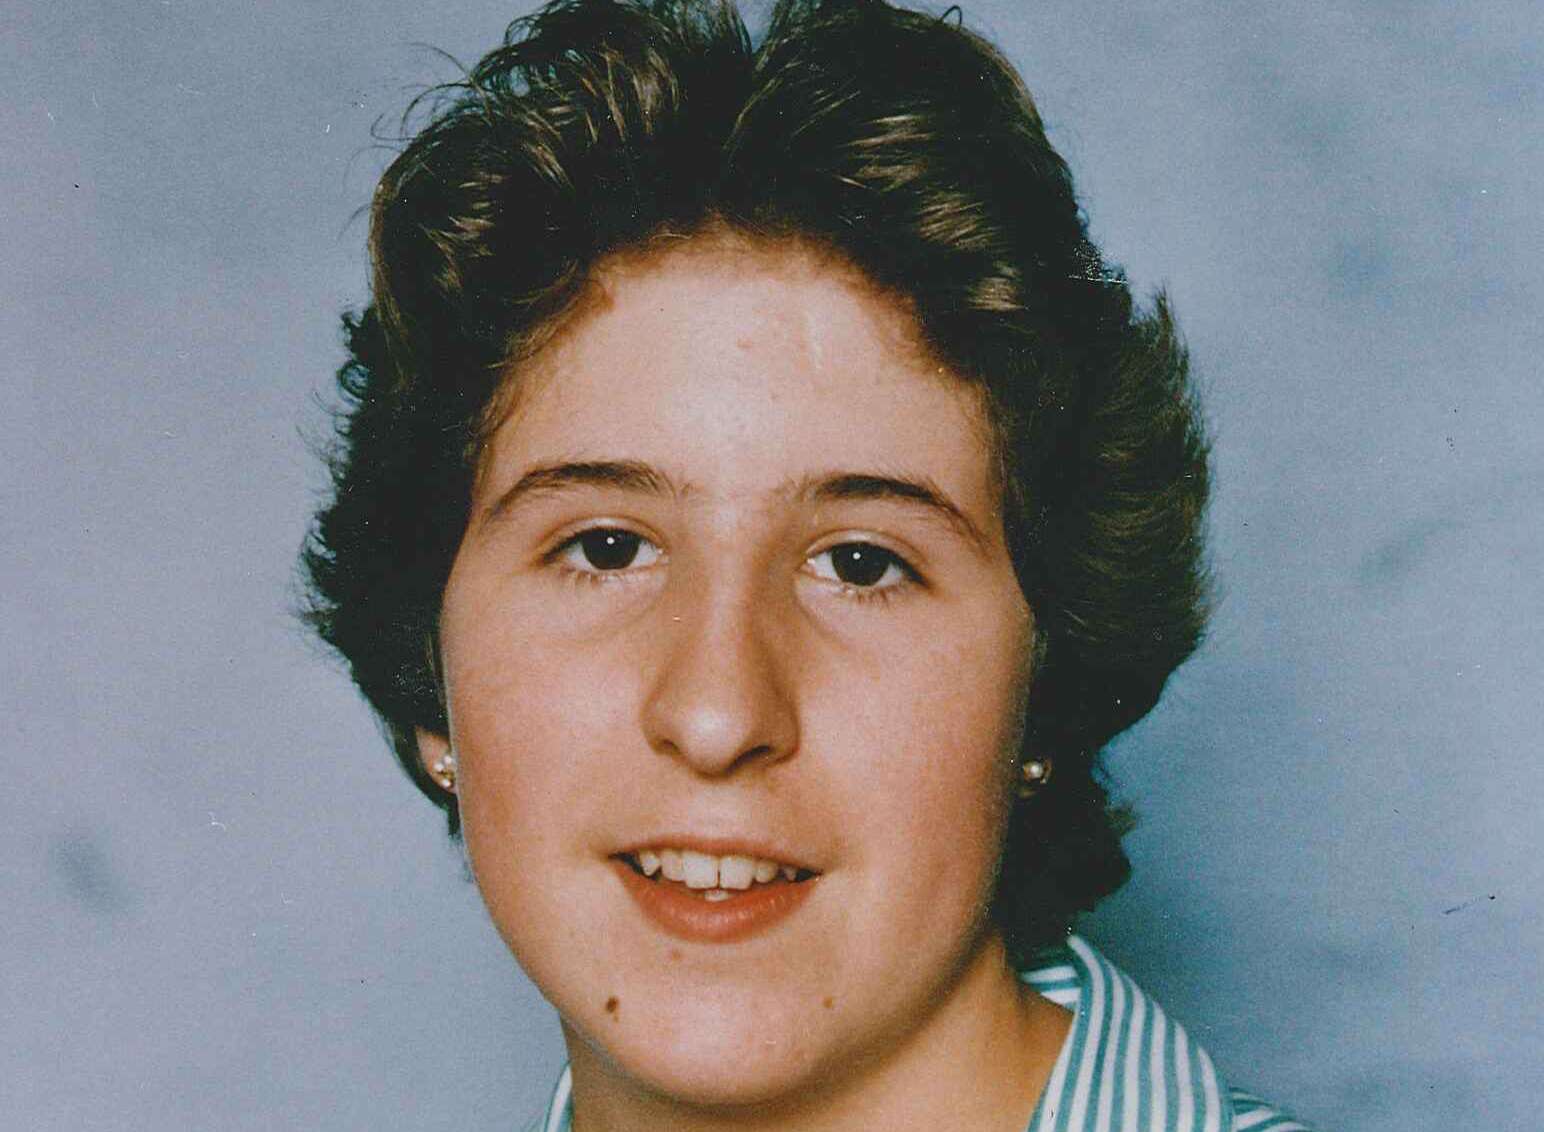 Claire Tiltman was stabbed to death in 1993